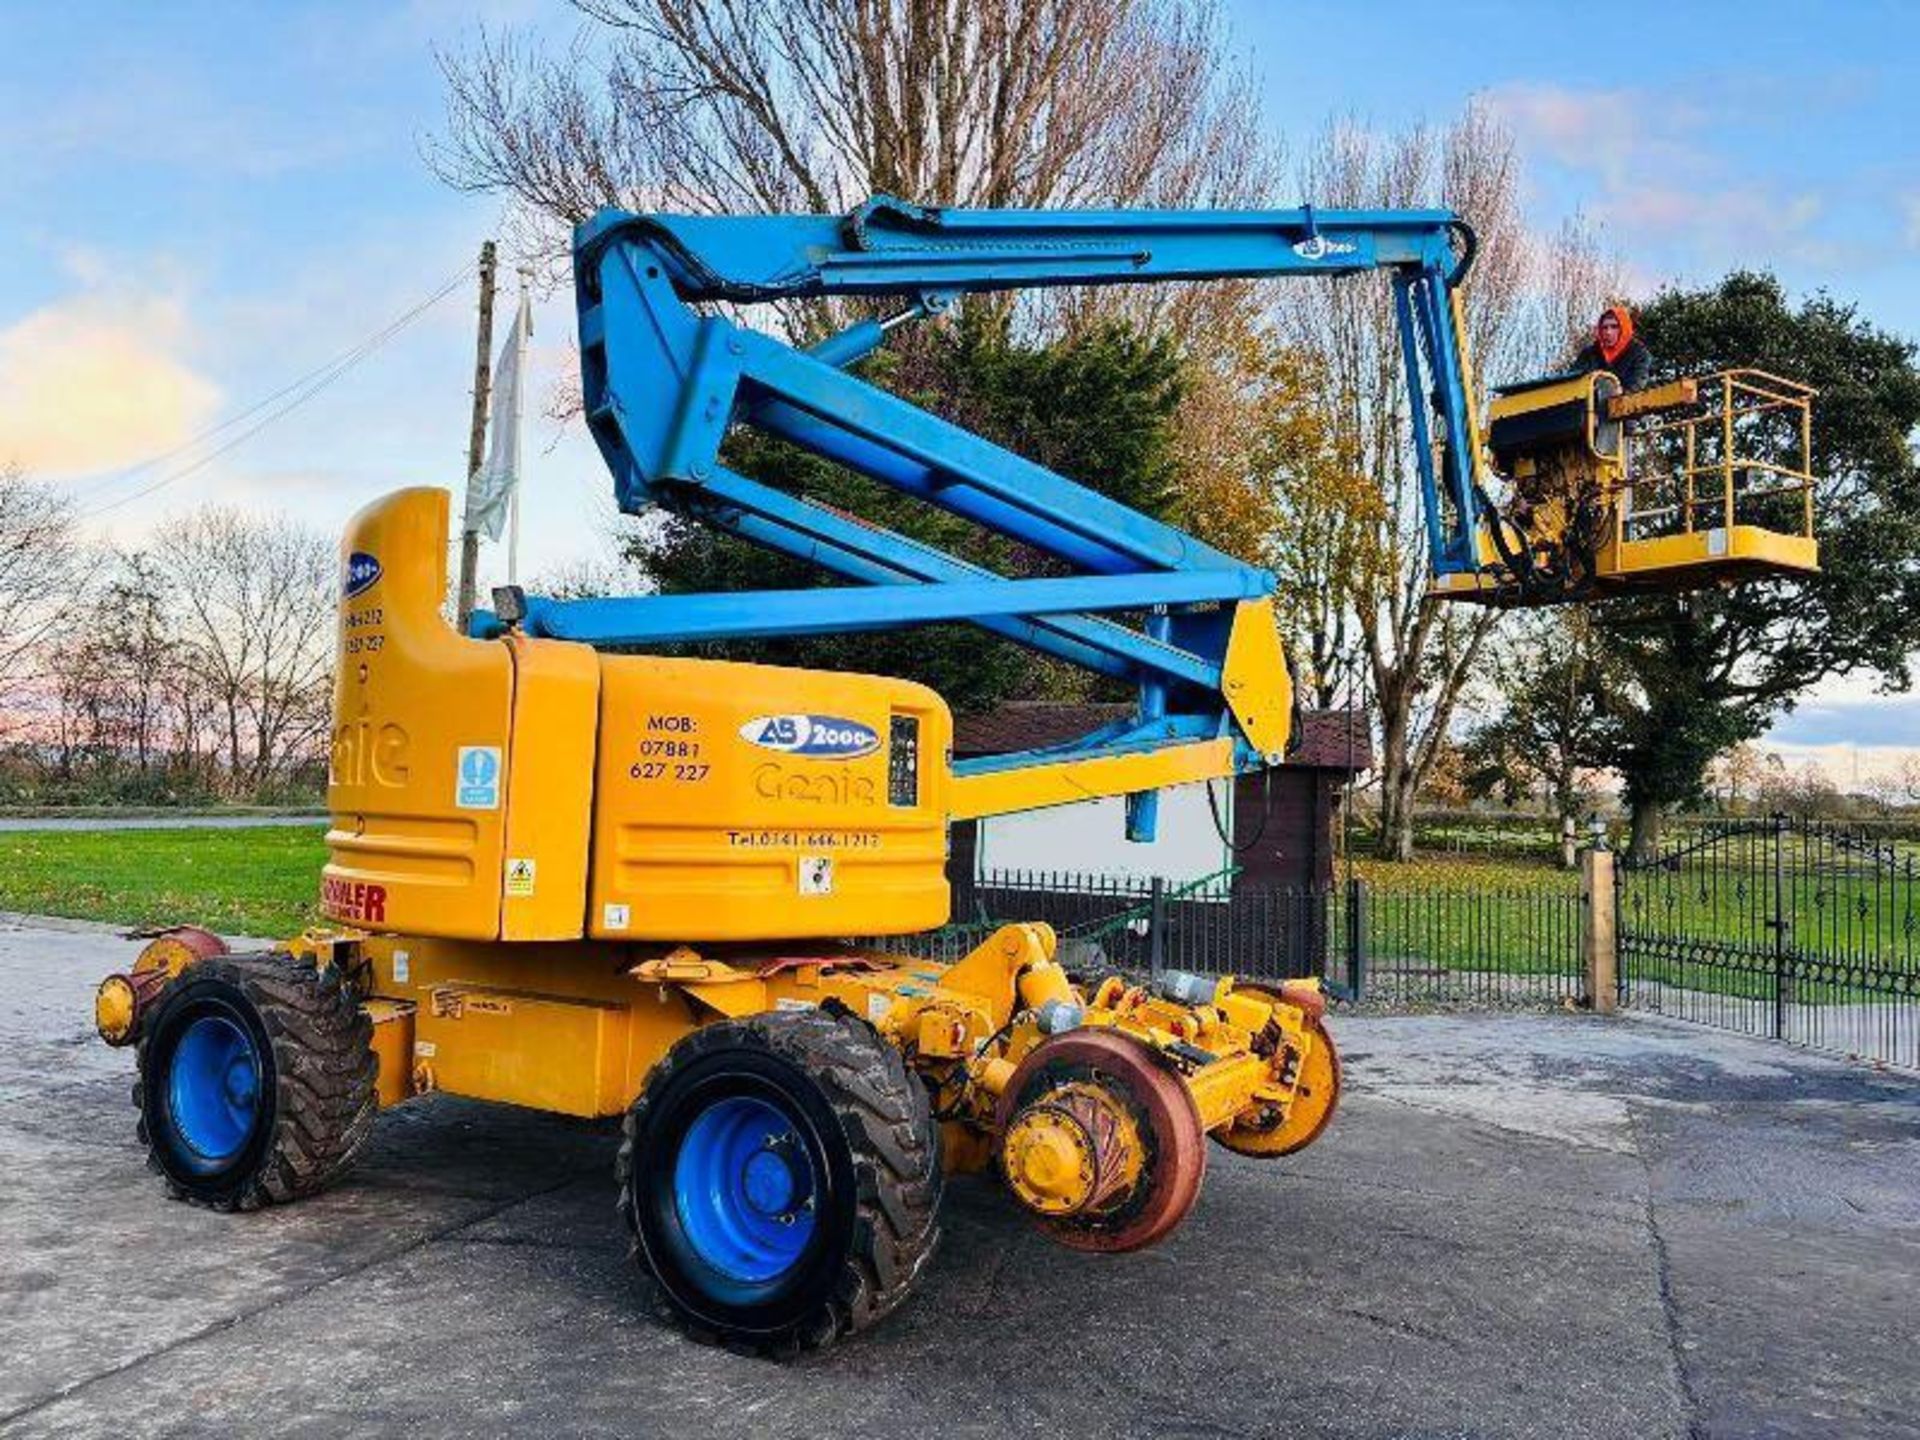 GENIE Z-60/34 4WD ARTICULATED RAIL ROAD BOOM LIFT * 20.3 METER REACH * - Image 12 of 15